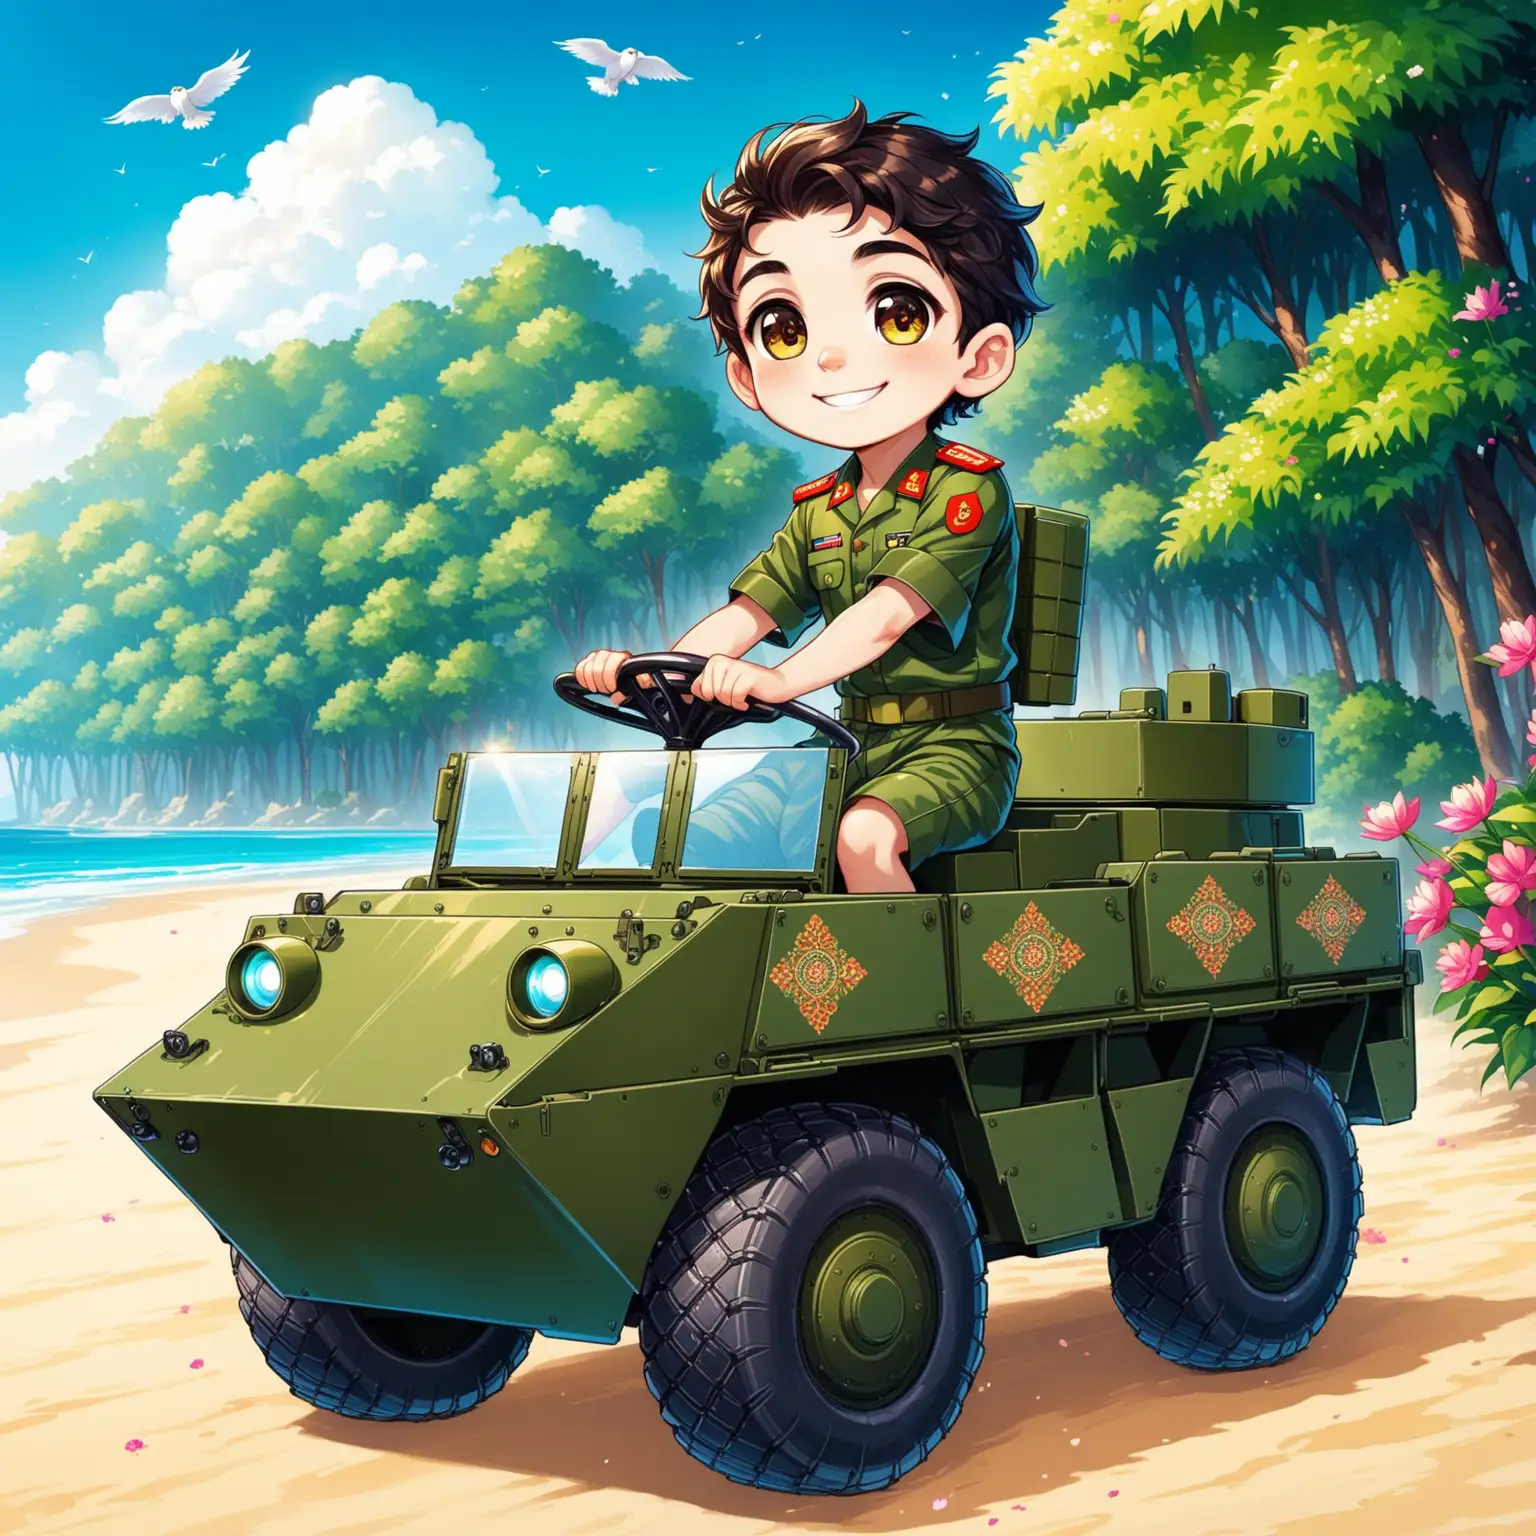 Character Persian 9 years old boy(riding military vehicle, smaller eyes, bigger nose, white skin, cute, smiling, clothes full of Persian designs, heavenly and warrior boy).

Atmosphere super high-tech and modern military vehicles around at a fantastic beach, flowers, forest.